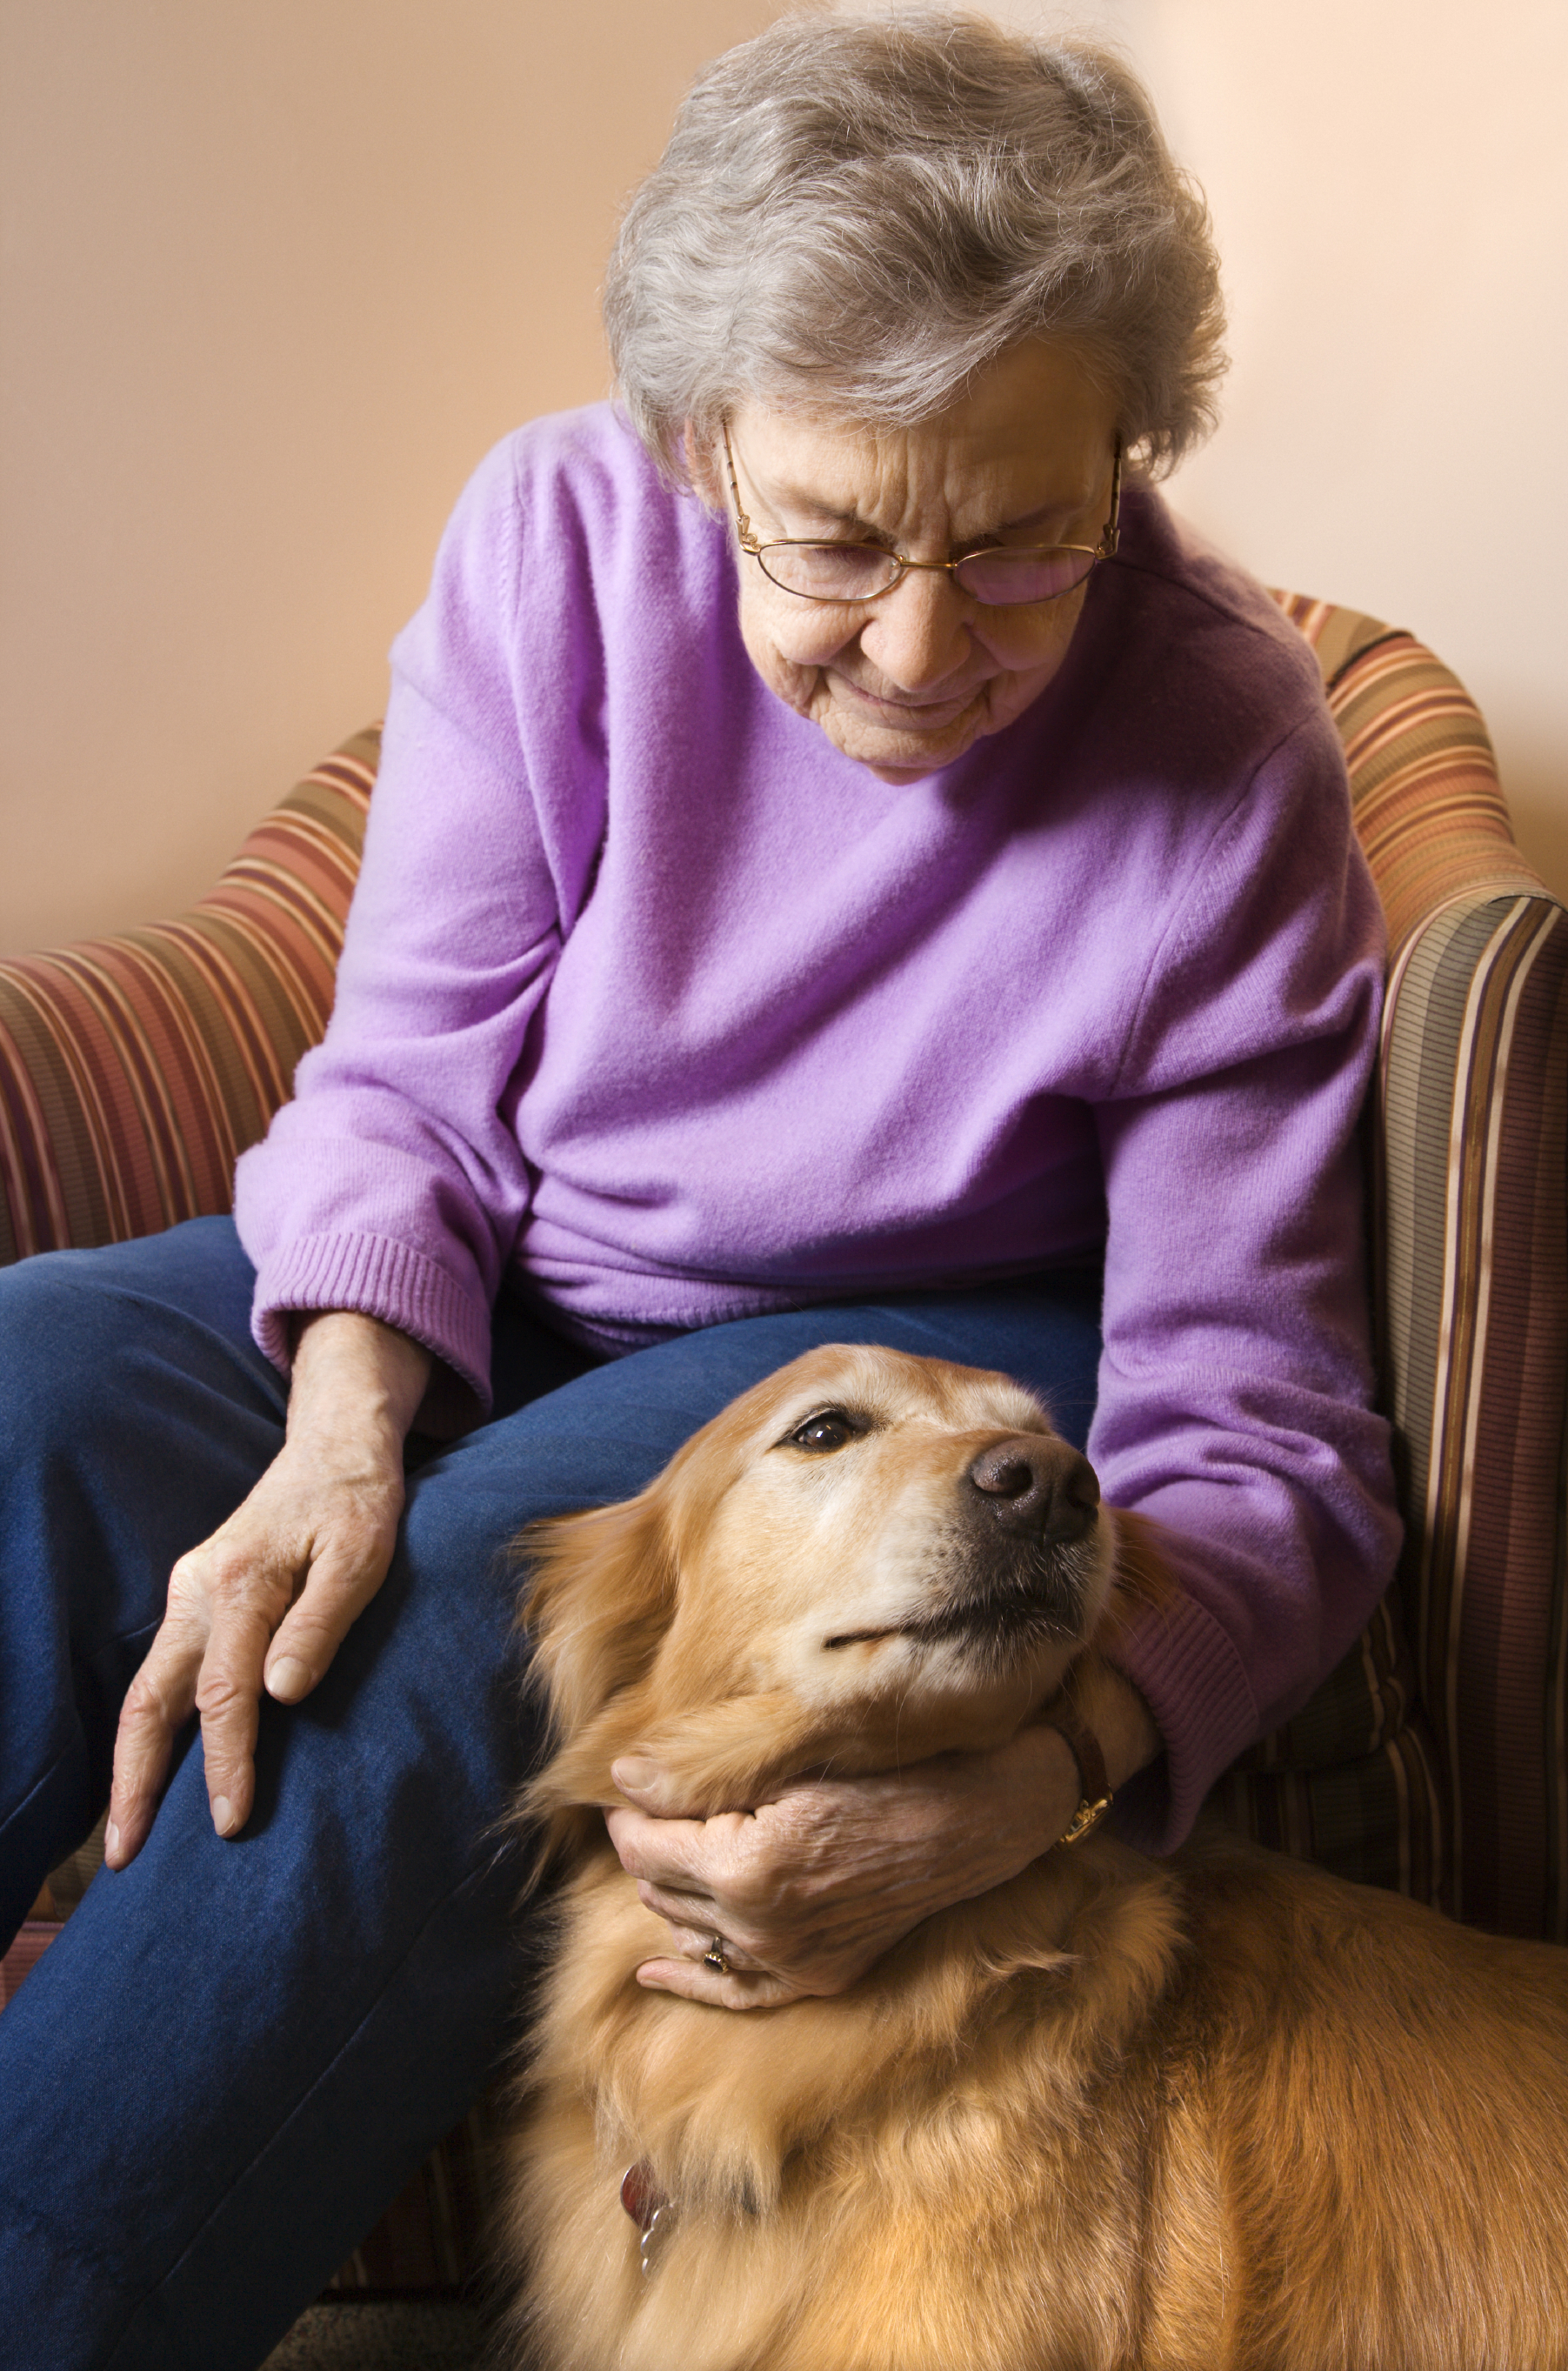 An Older Woman Sitting in a Chair Petting Her Dog